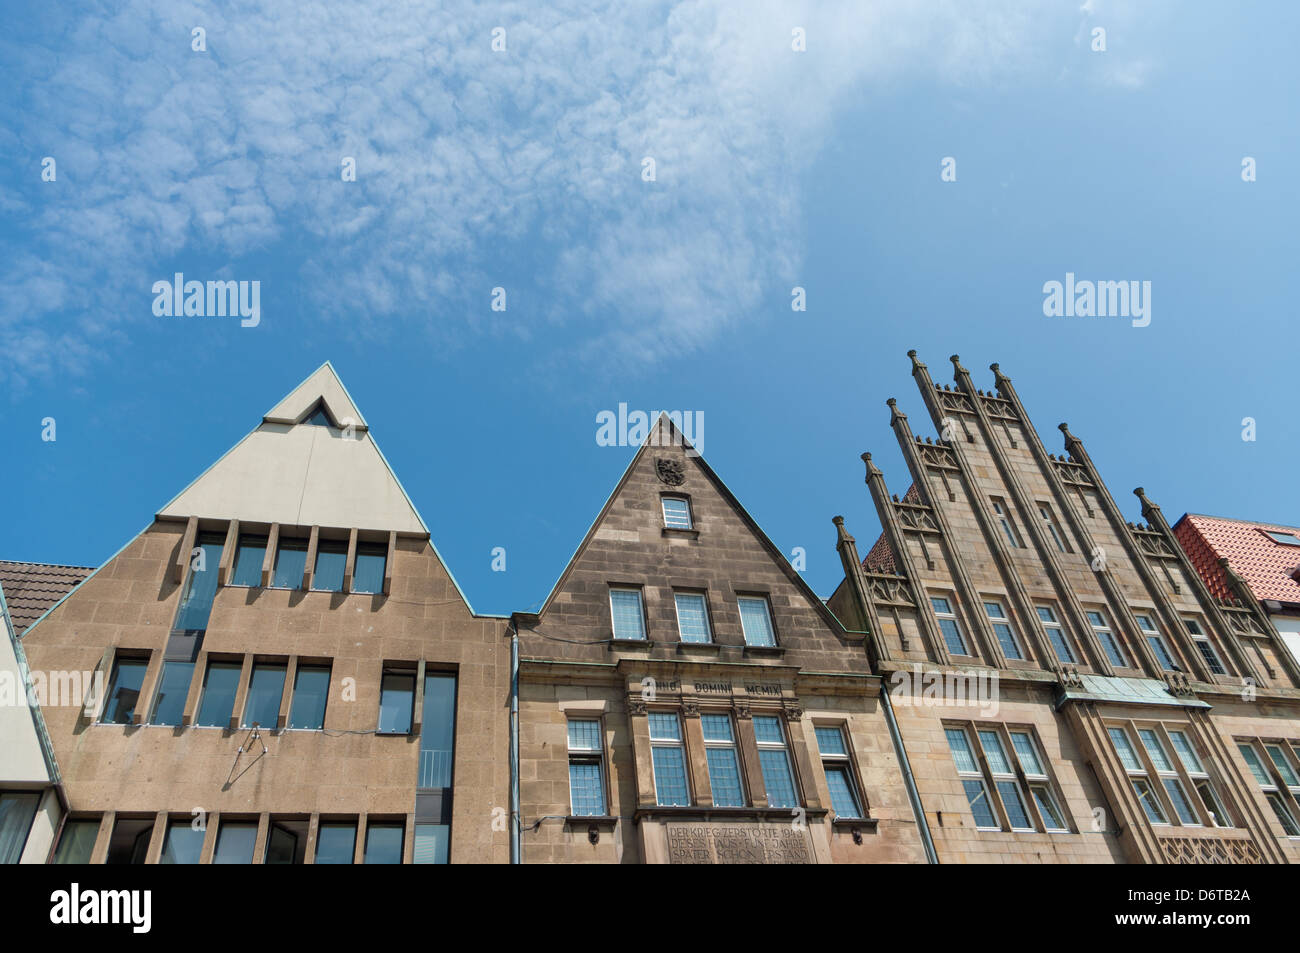 monumental facades in munster, germany Stock Photo